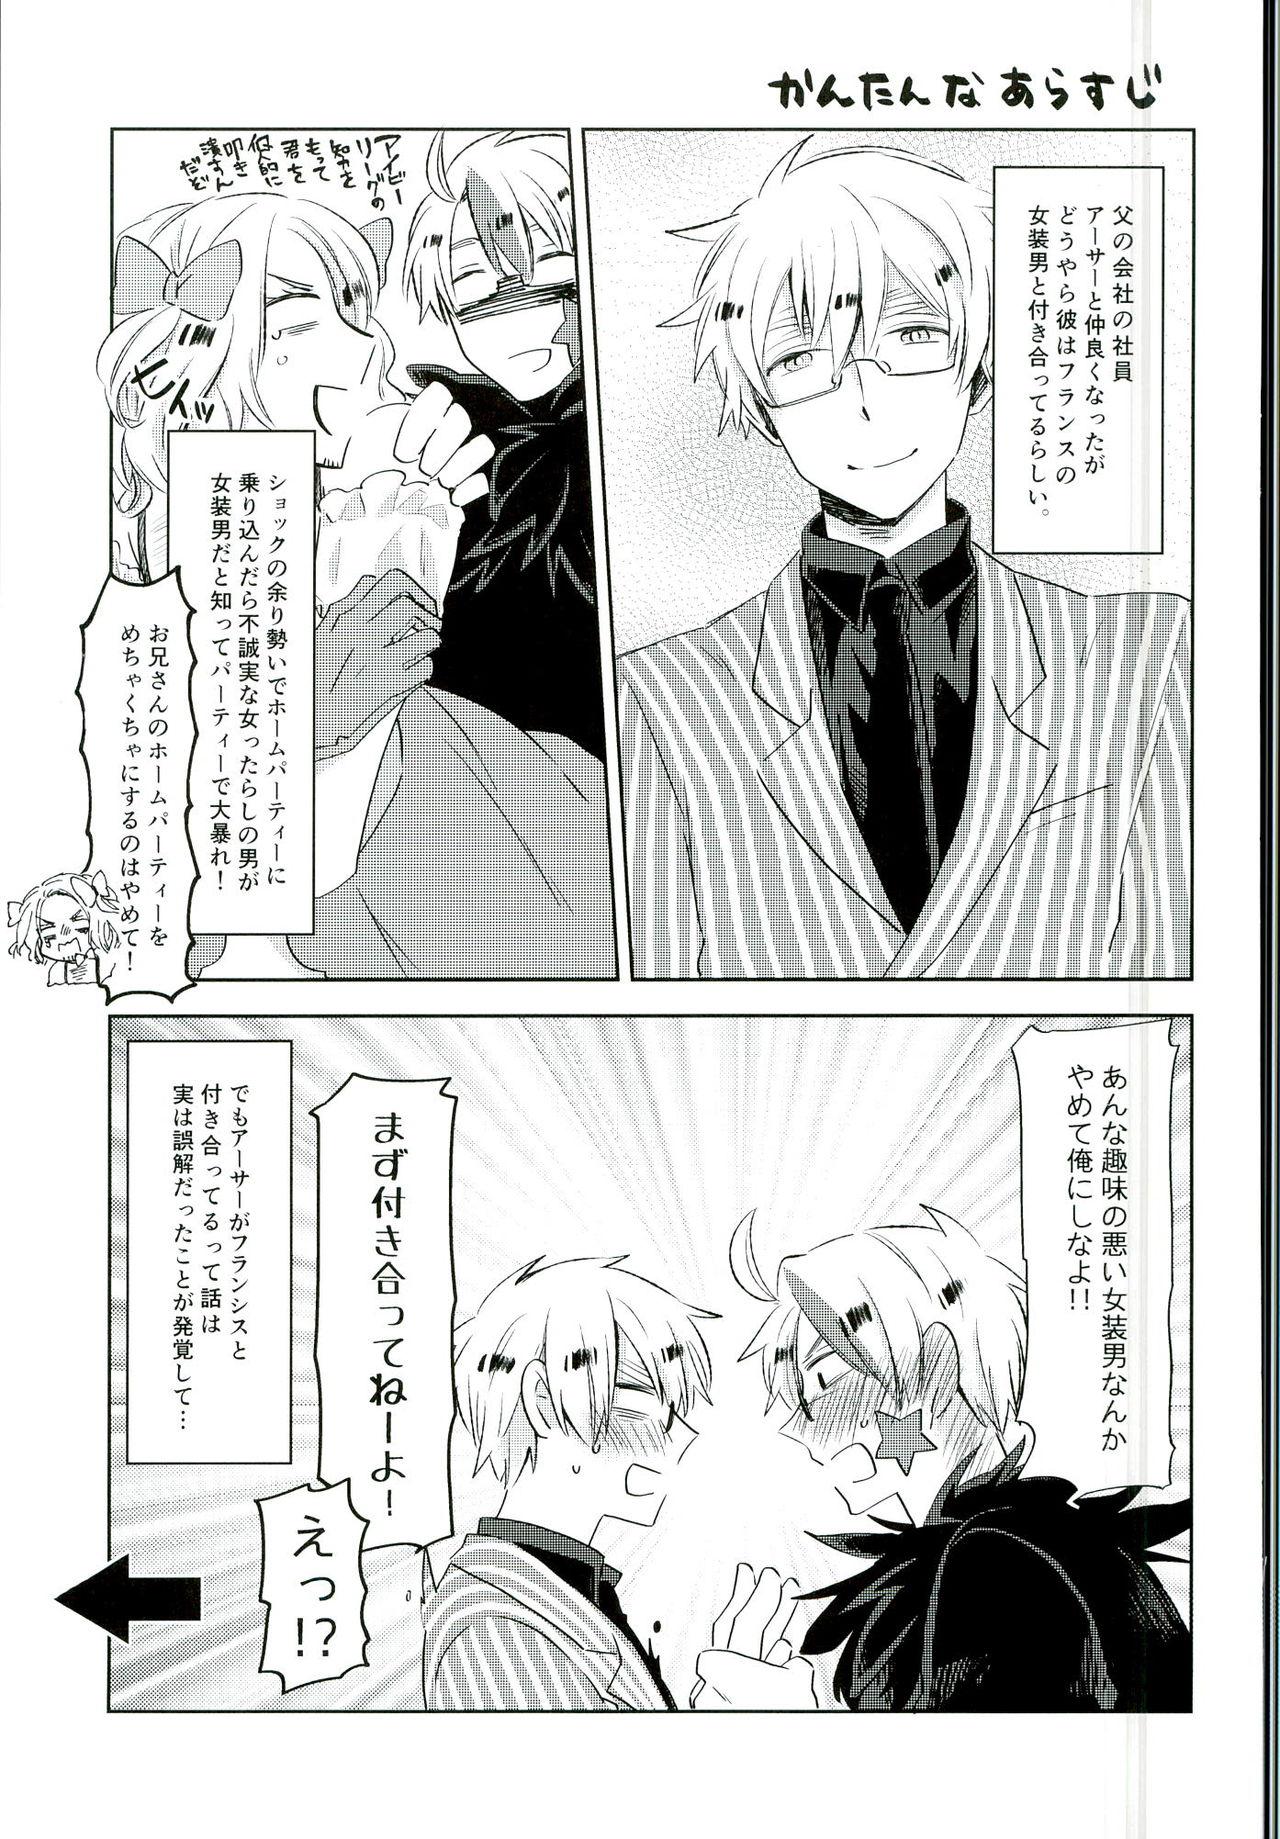 Swallow Ameagari no Slip Out - Axis powers hetalia Married - Page 2